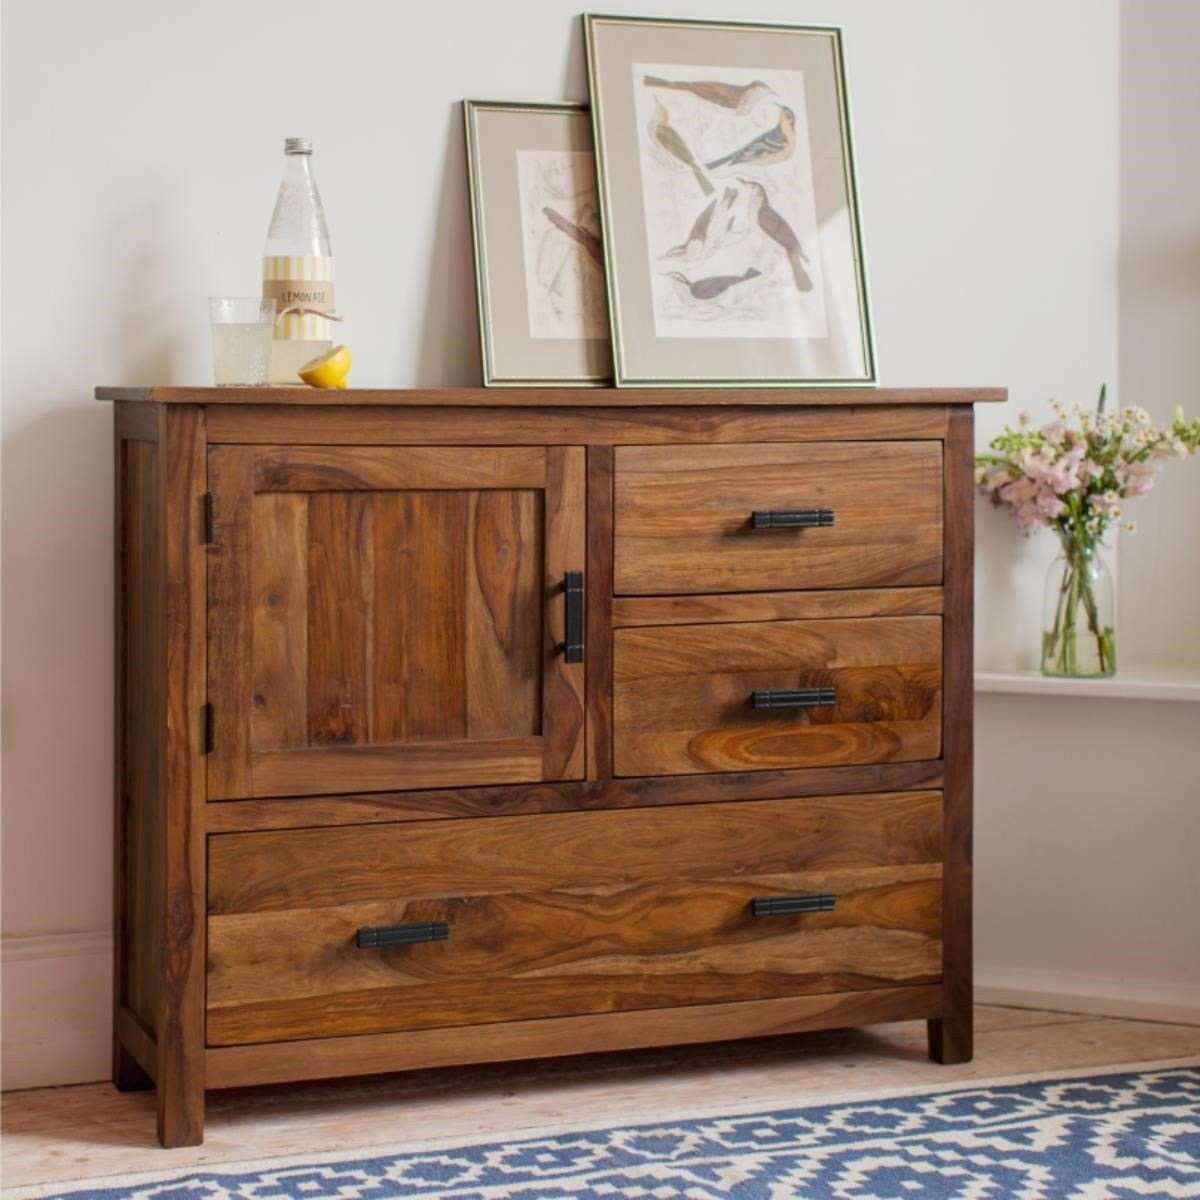 Jett Sheesham Wood Sideboard Cabinet For Living Room Furniture 3 Drawers 1 Cabinet  Storage Natural Honey Finish – Shagun Arts In Wood Cabinet With Drawers (View 13 of 15)